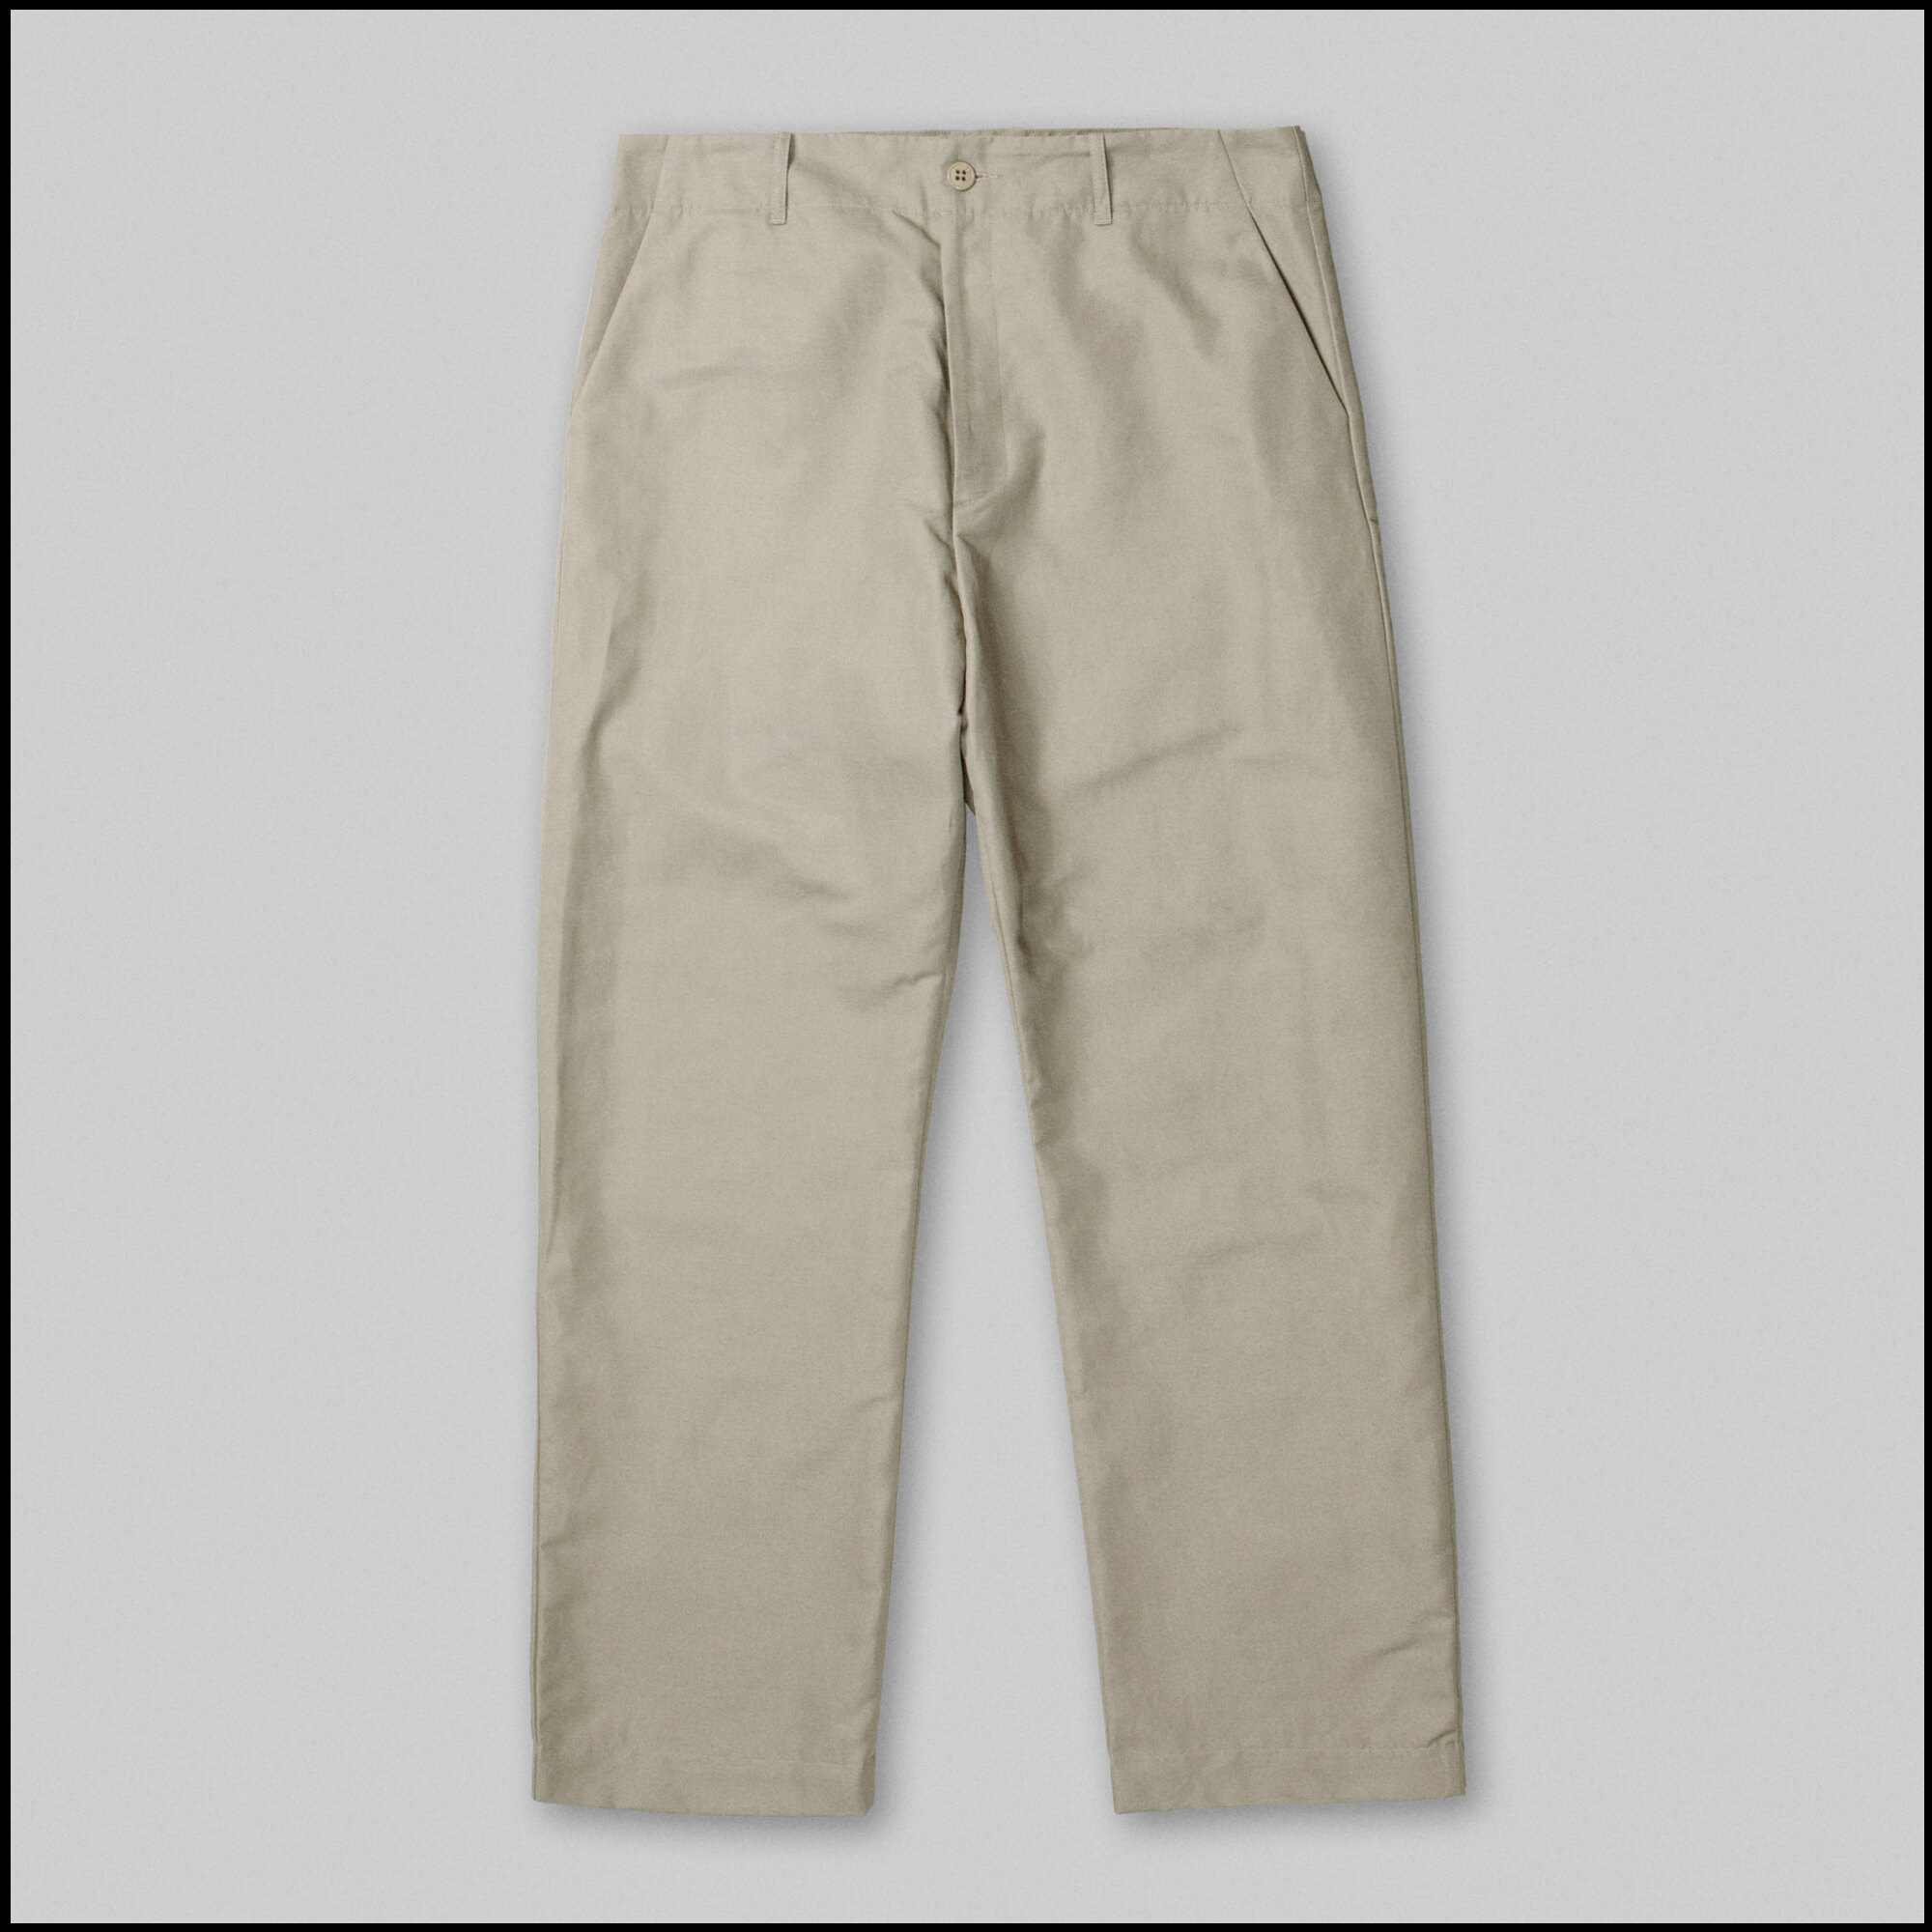 FOX Pants by Arpenteur in Stone color